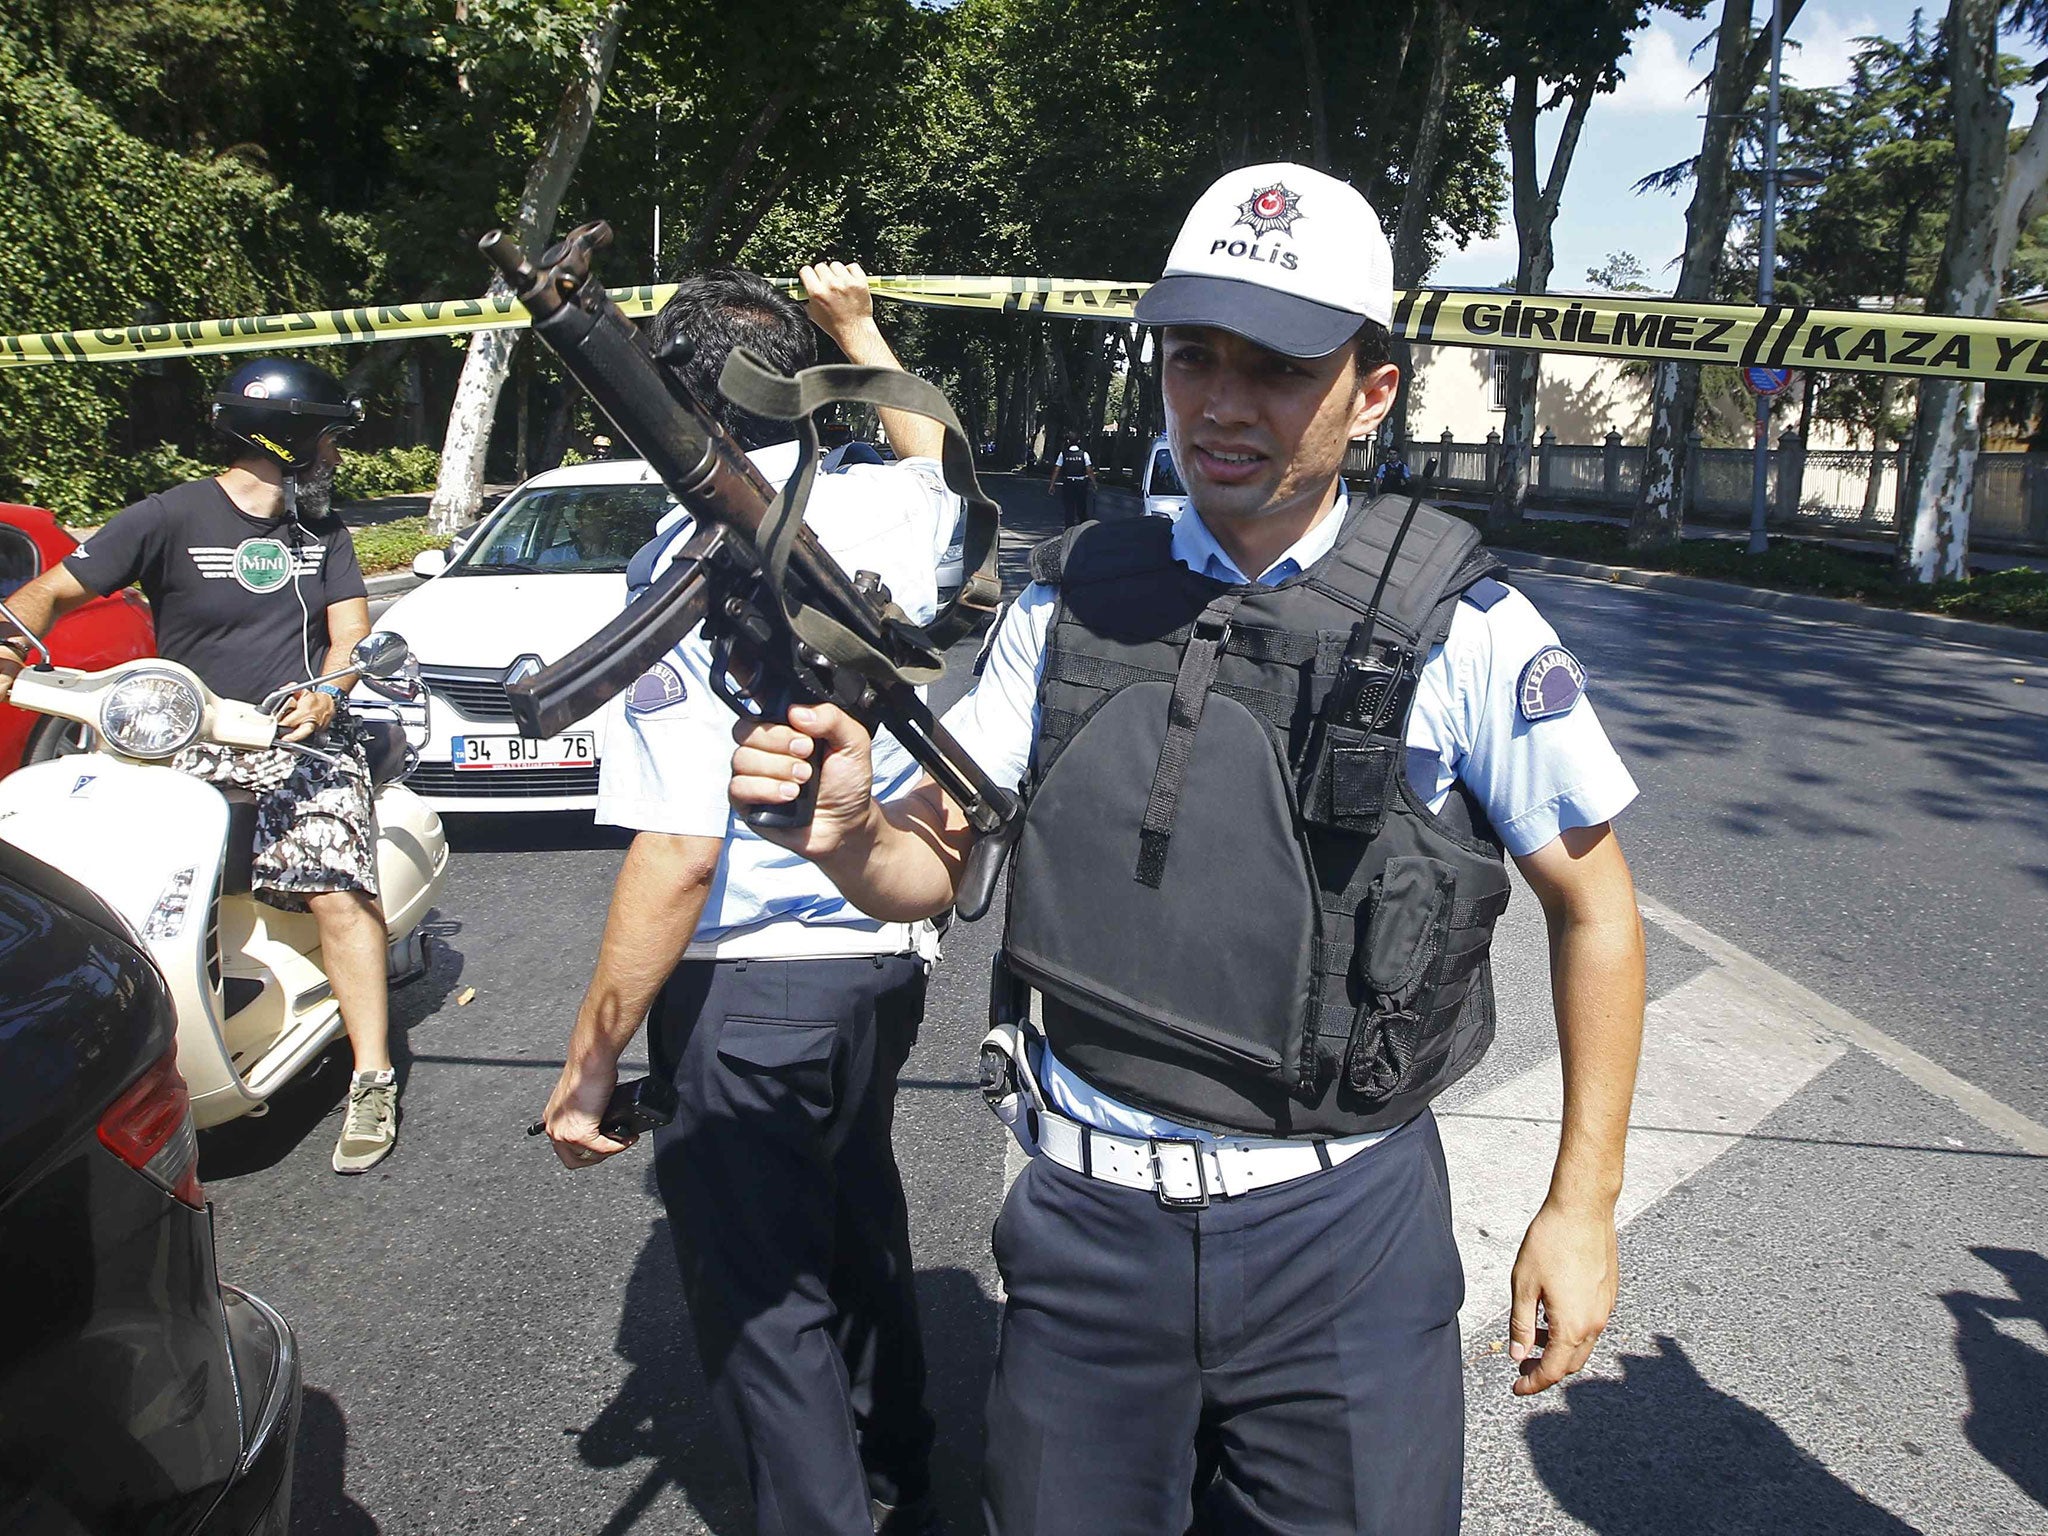 Turkish policemen secure the area after a shooting incident near the entrance to Dolmabahce palace in Istanbul, Turkey, 19 August, 2015